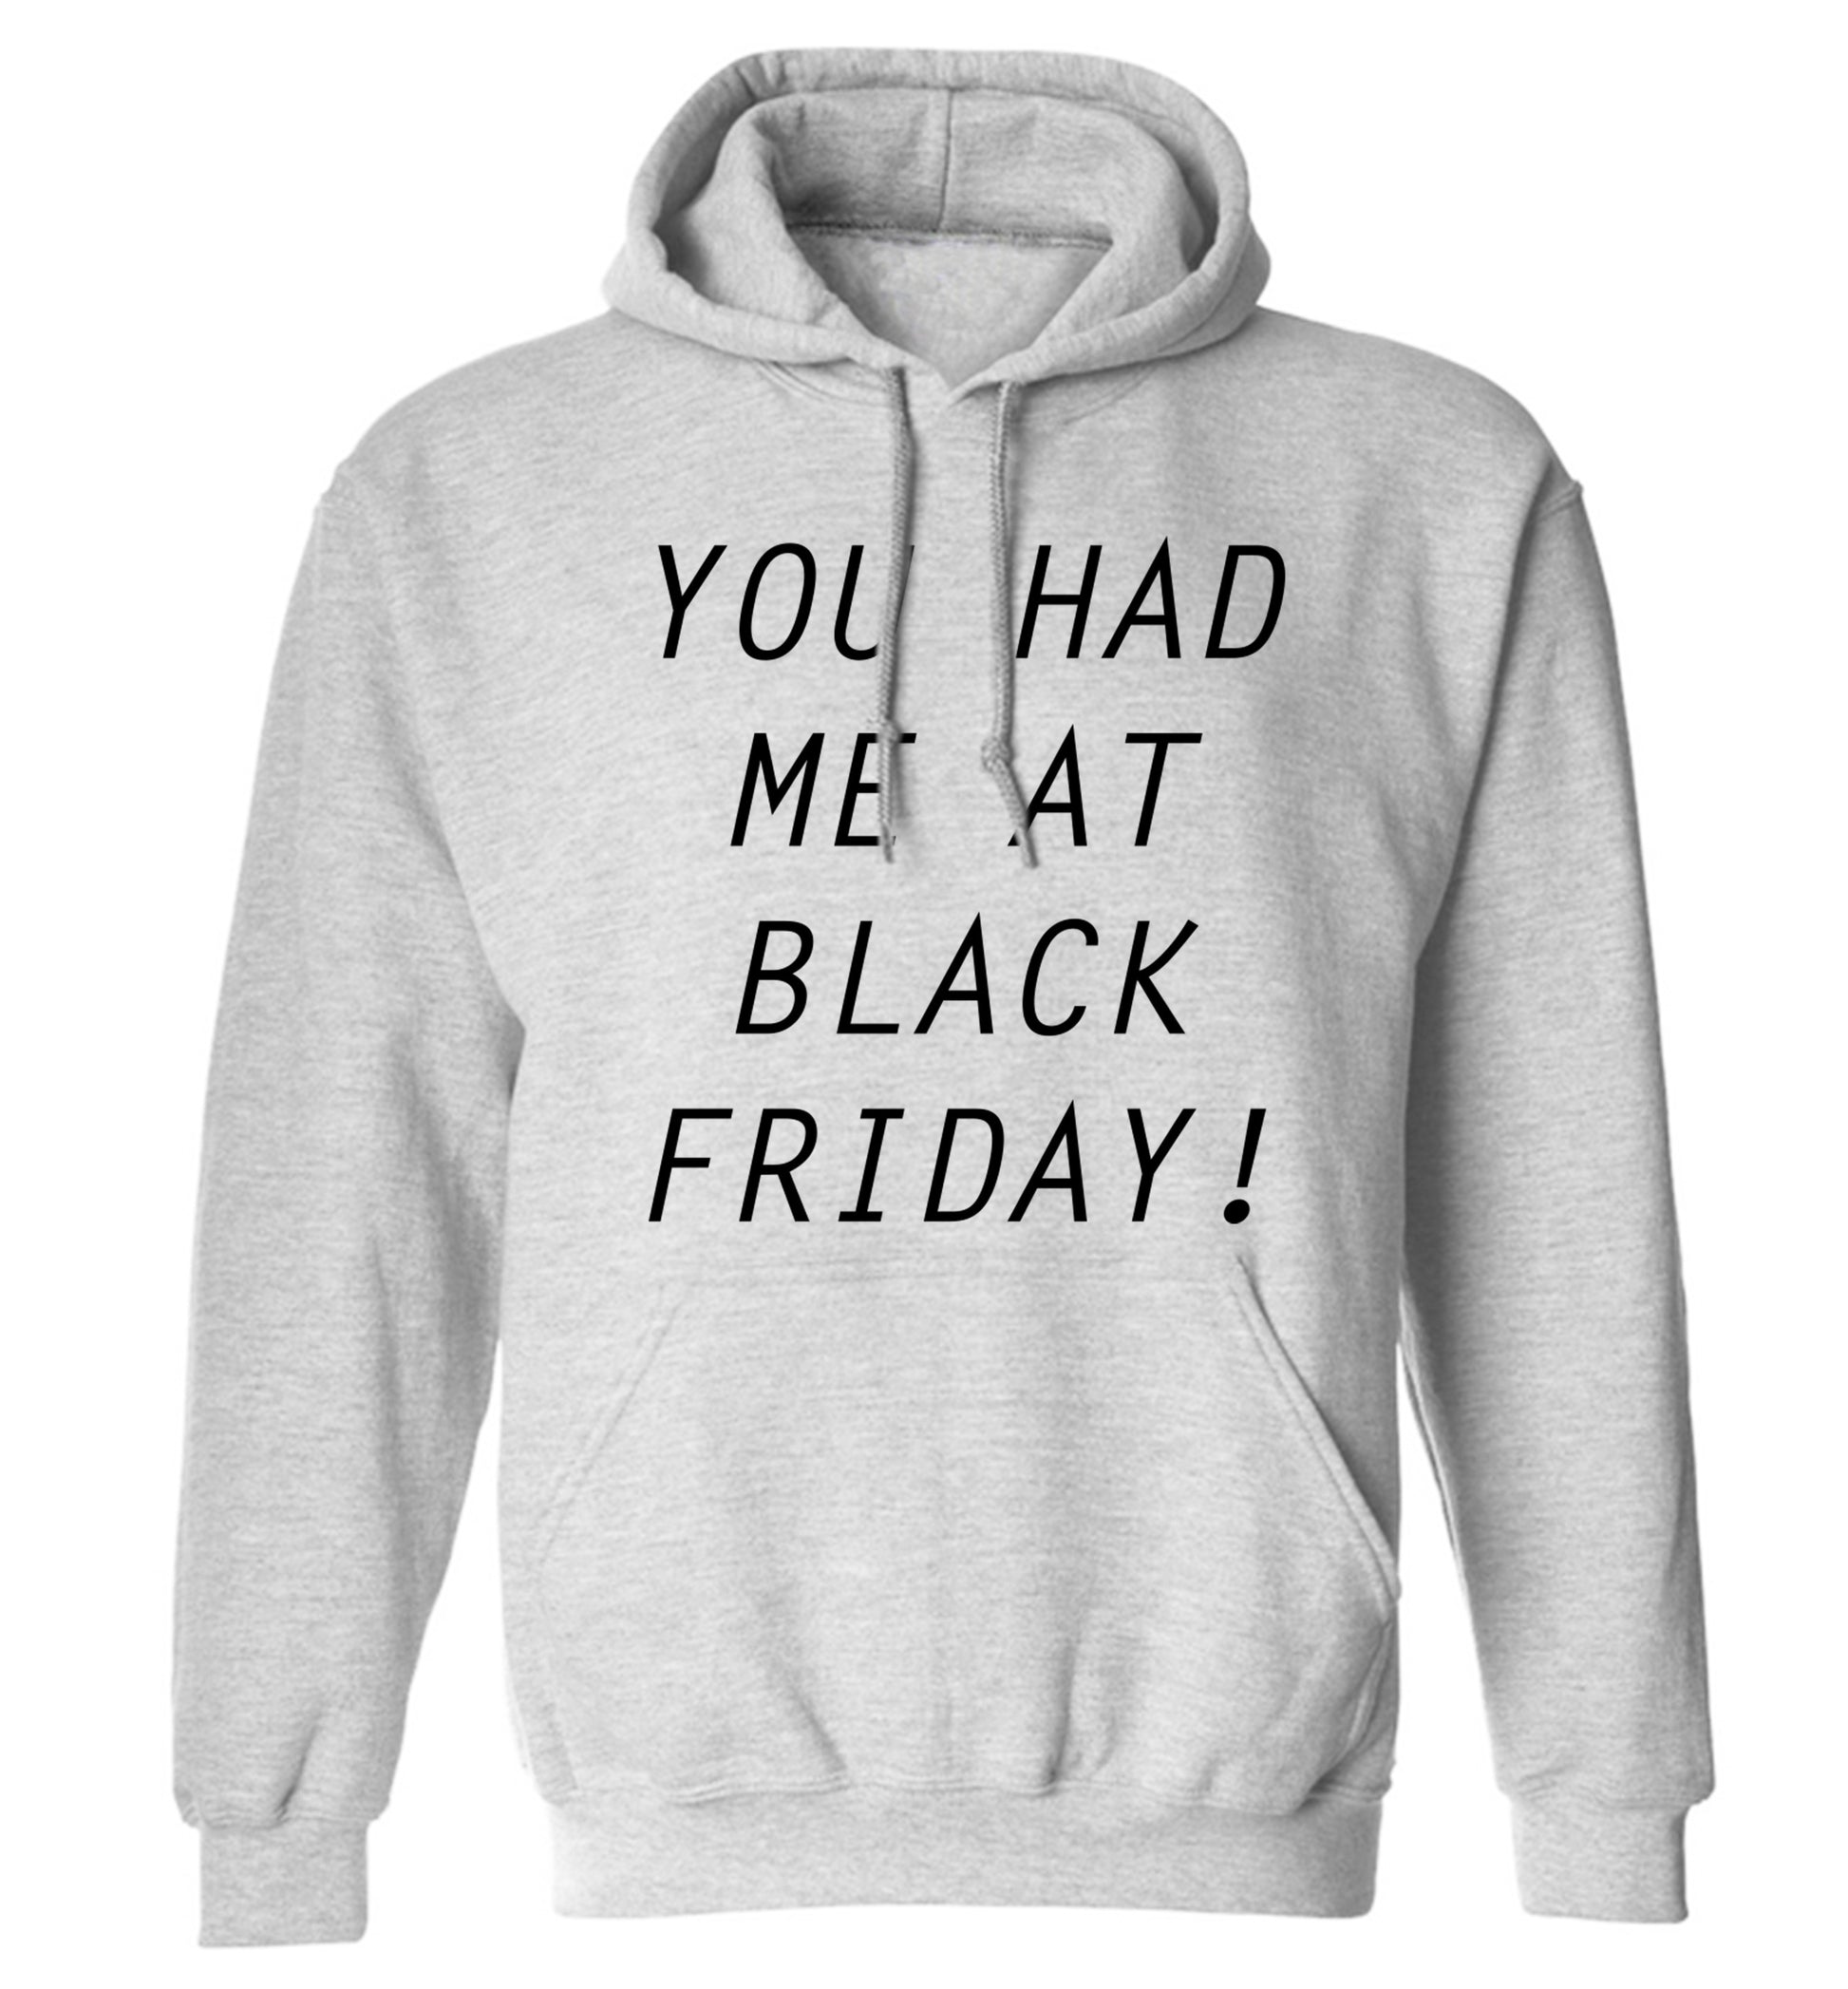 You had me at black friday adults unisex grey hoodie 2XL